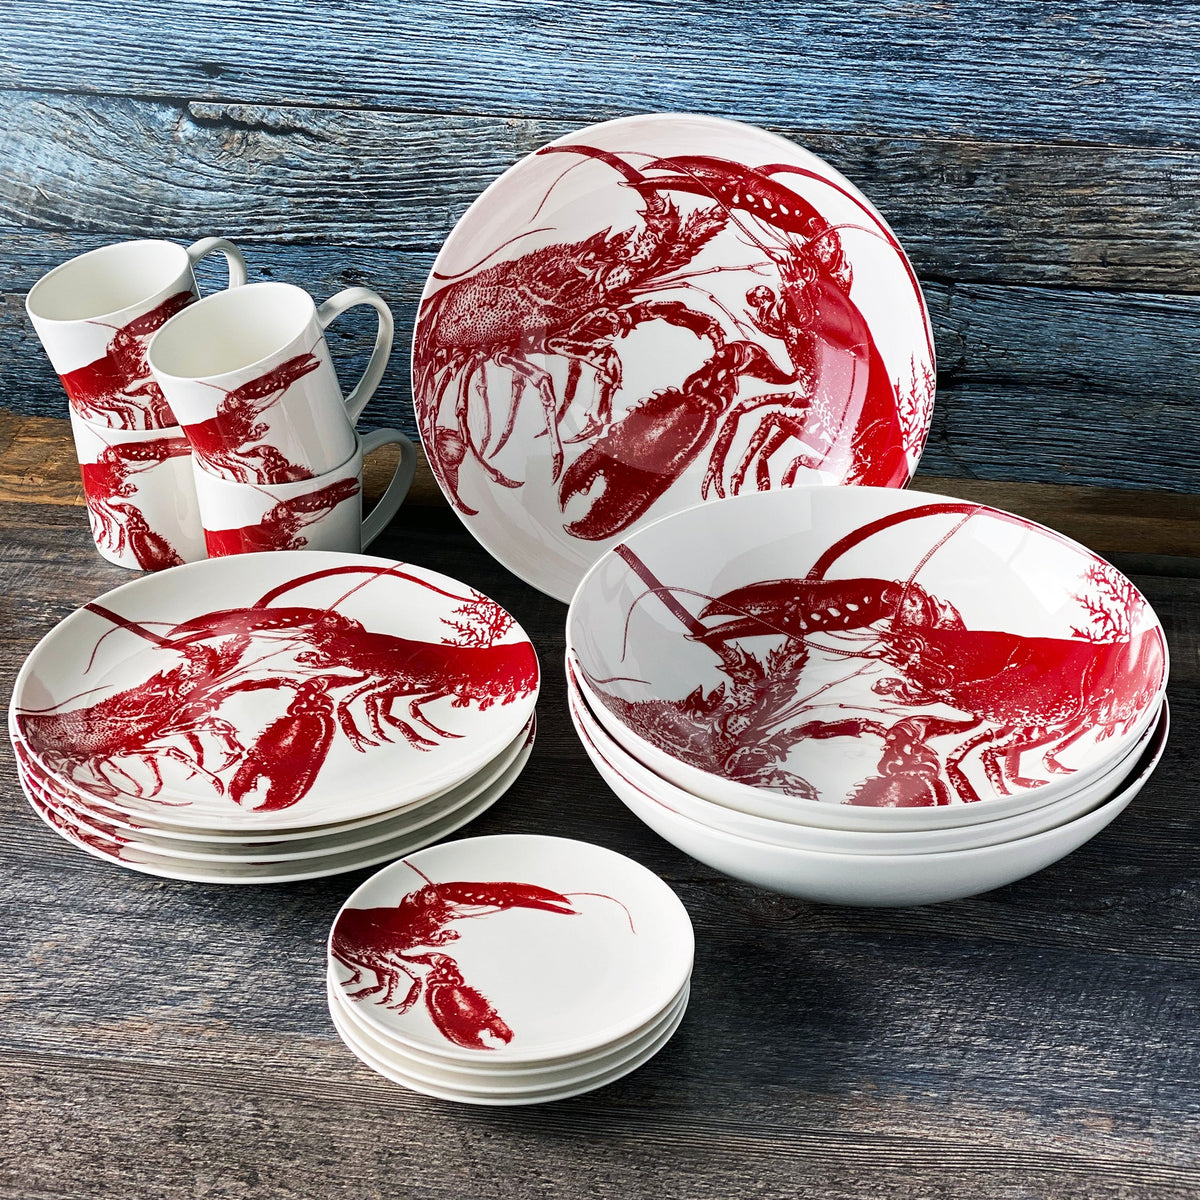 A set of Caskata Lobster Red Coupe Dinner Plates featuring lobsters, with a combination of red and white colors.